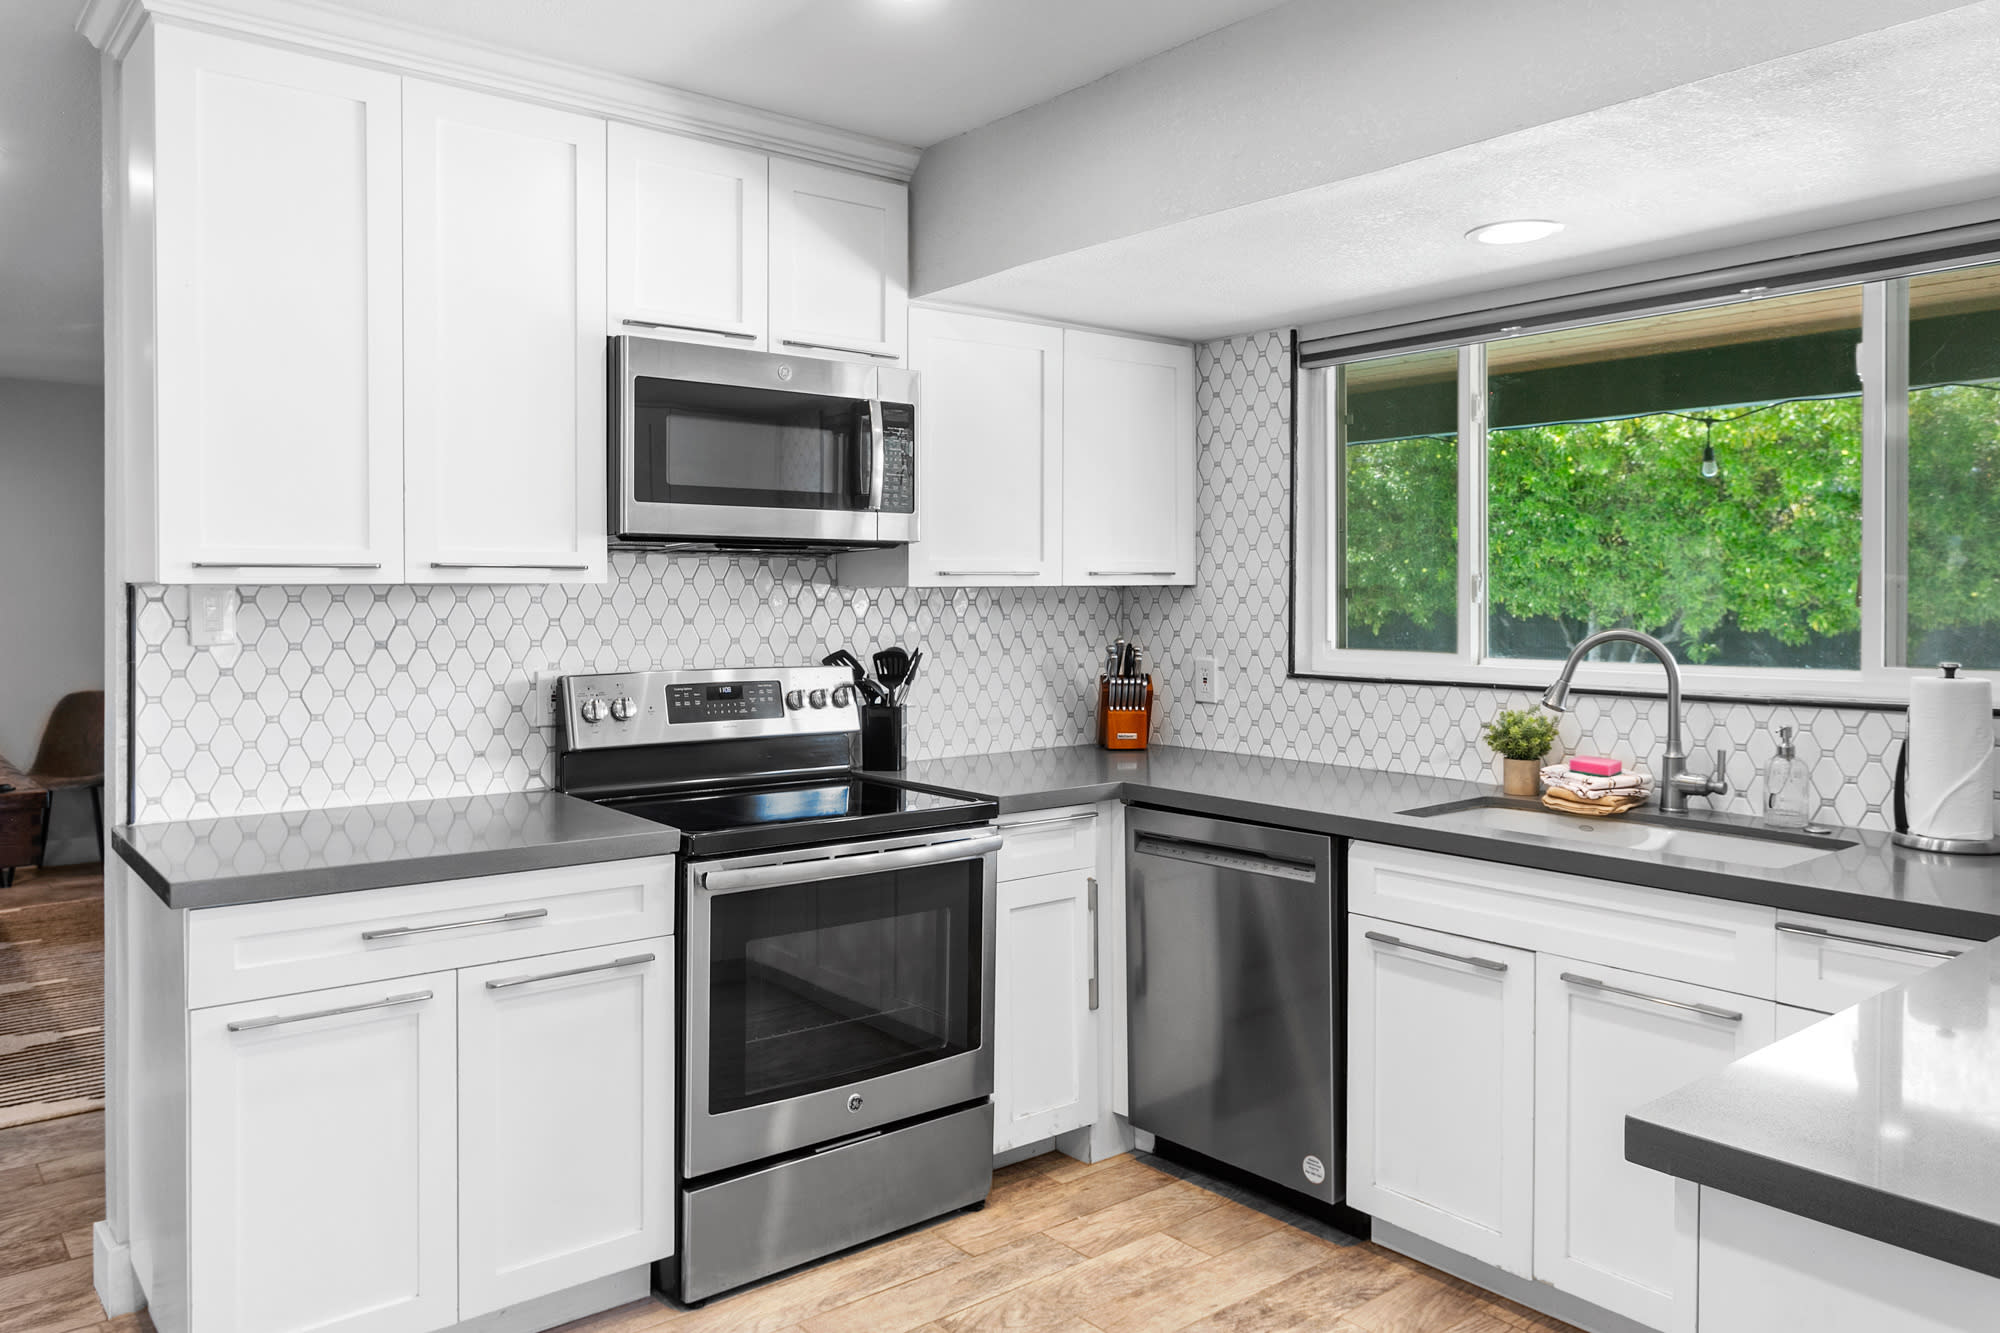 Newly renovated, Fully stocked kitchen with drip coffee maker and Keurig